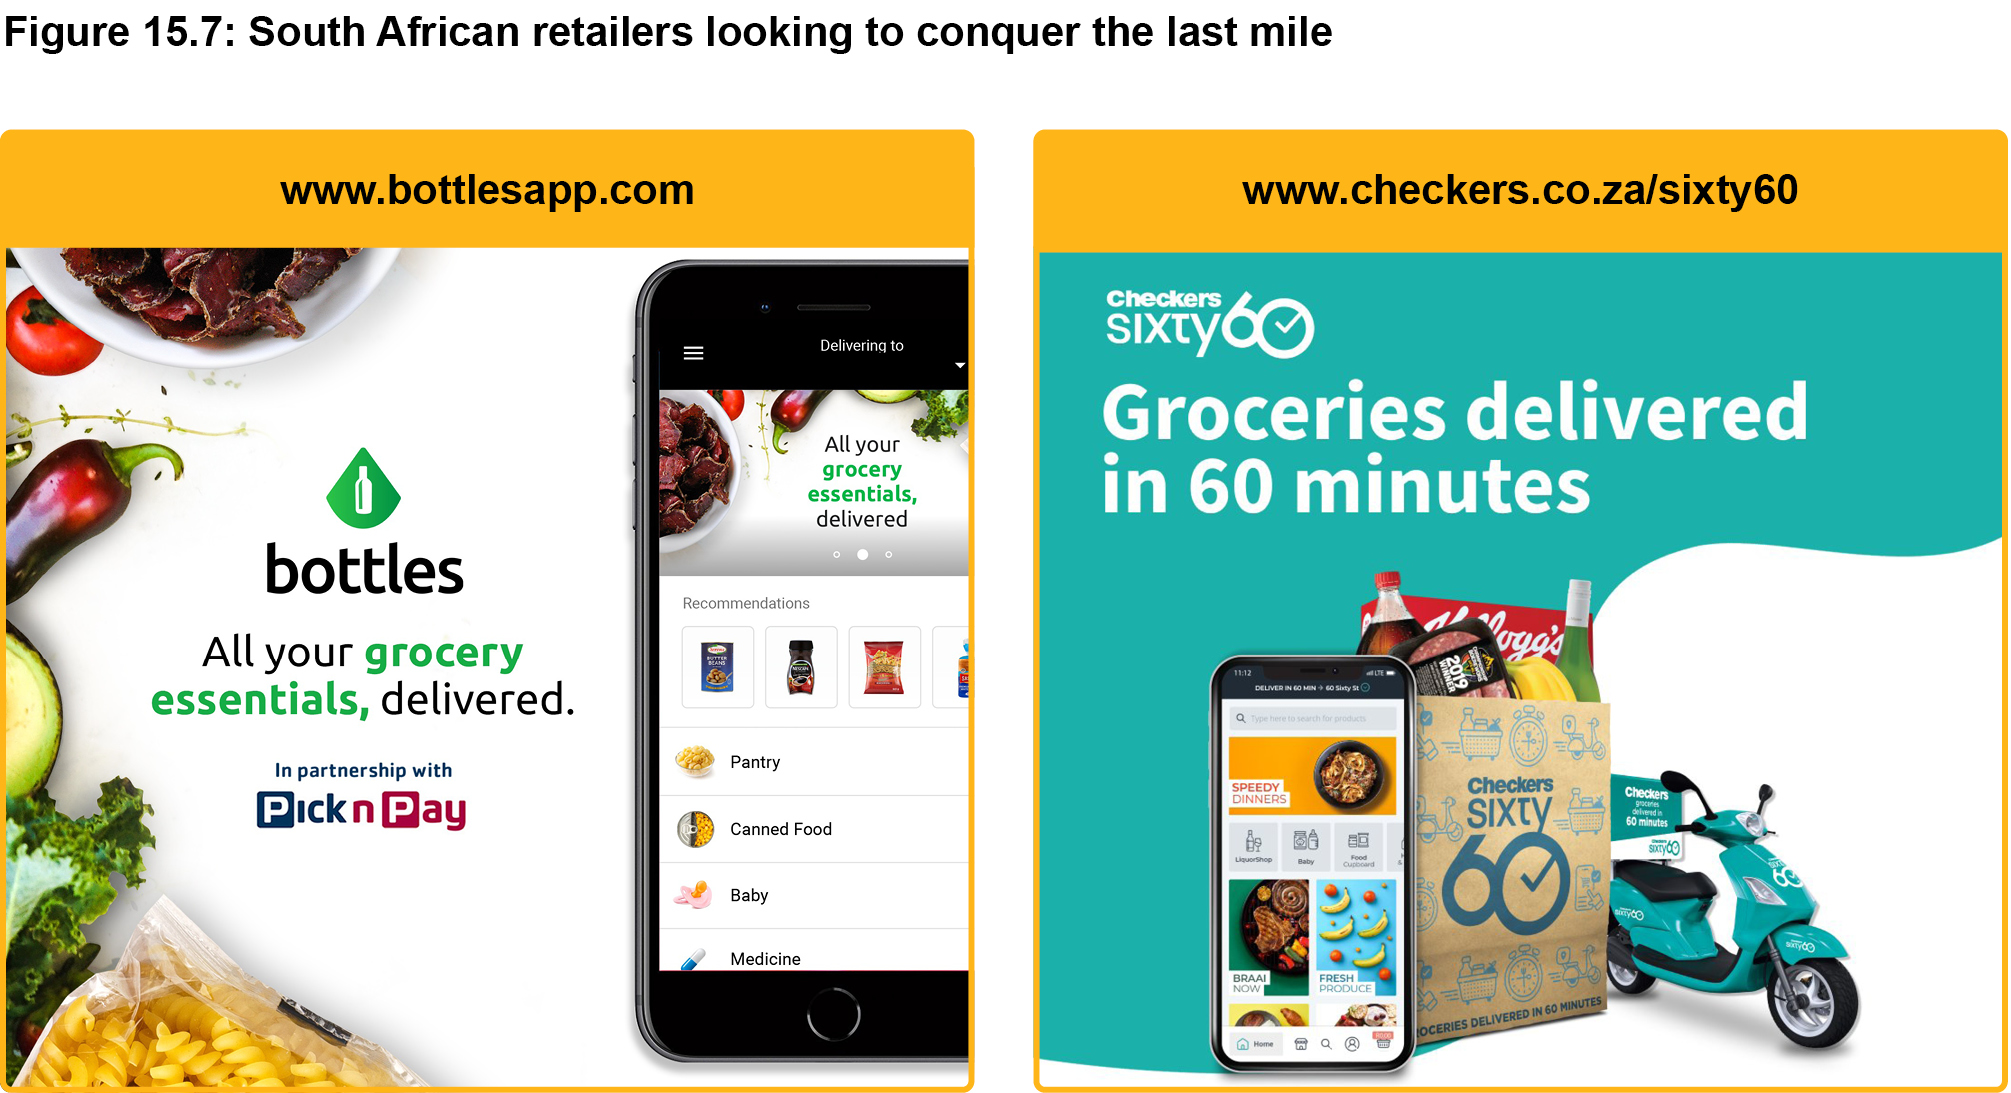 Figure 15.7: South African retailers looking to conquer the last mile.